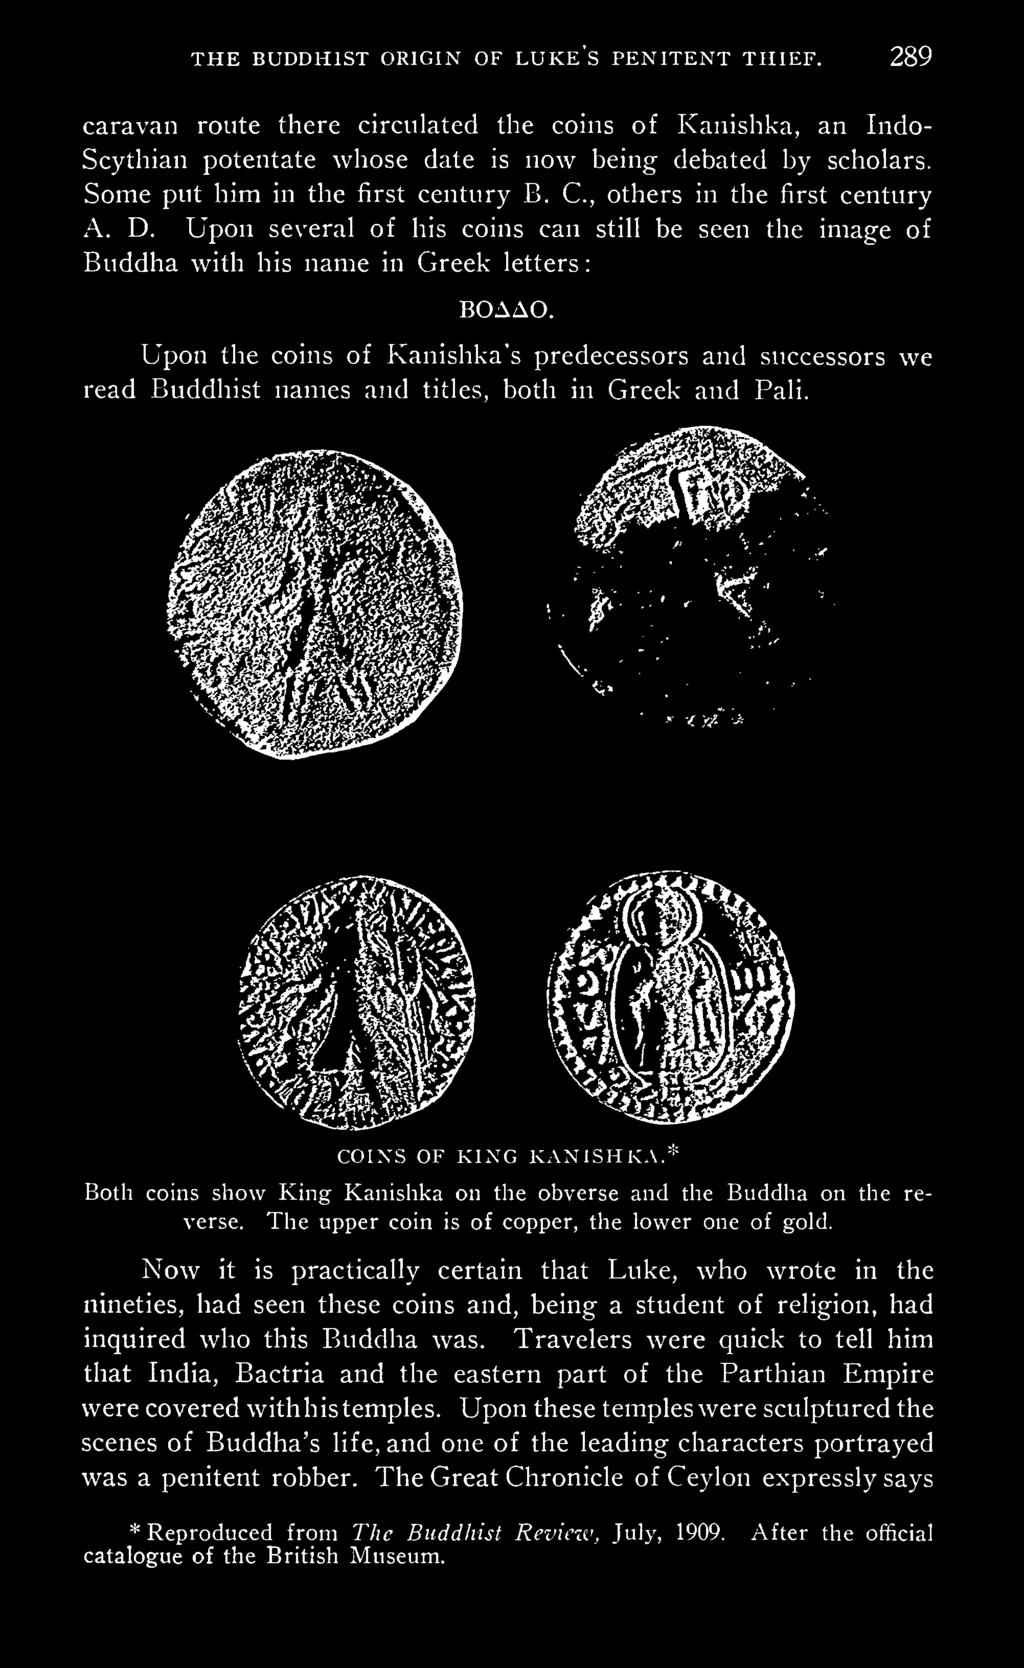 Now it is practically certain that Luke, who wrote in the nineties, had seen these coins and, being a student of religion, had inquired who this Buddha was.